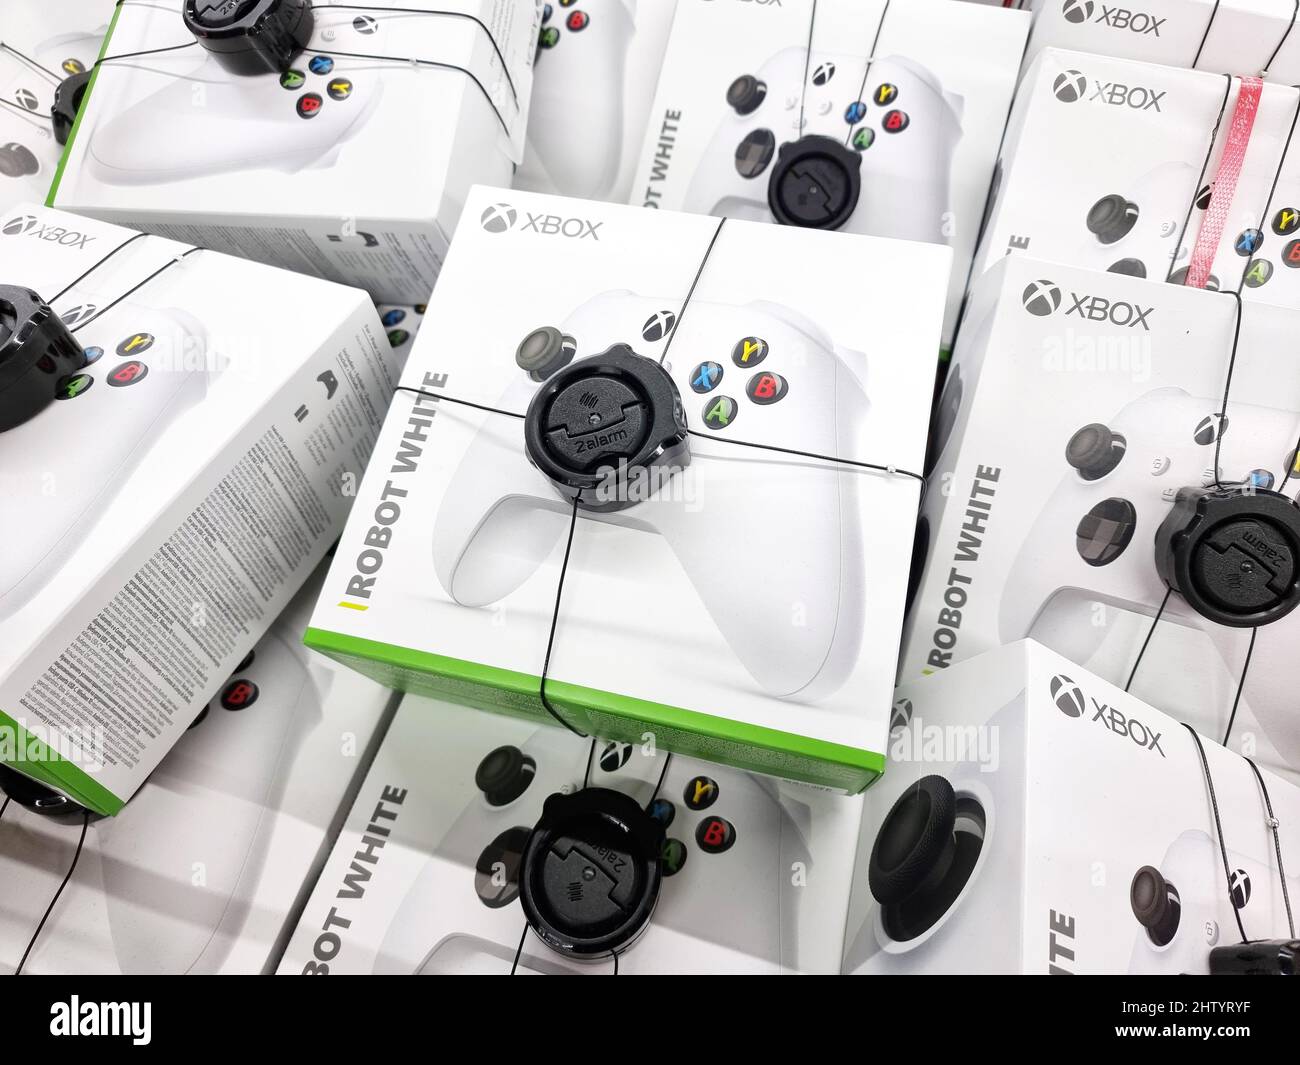 Microsoft Xbox One white controller, game pad packages, multiple packaged video game console controllers, store display, group of objects, closeup, no Stock Photo